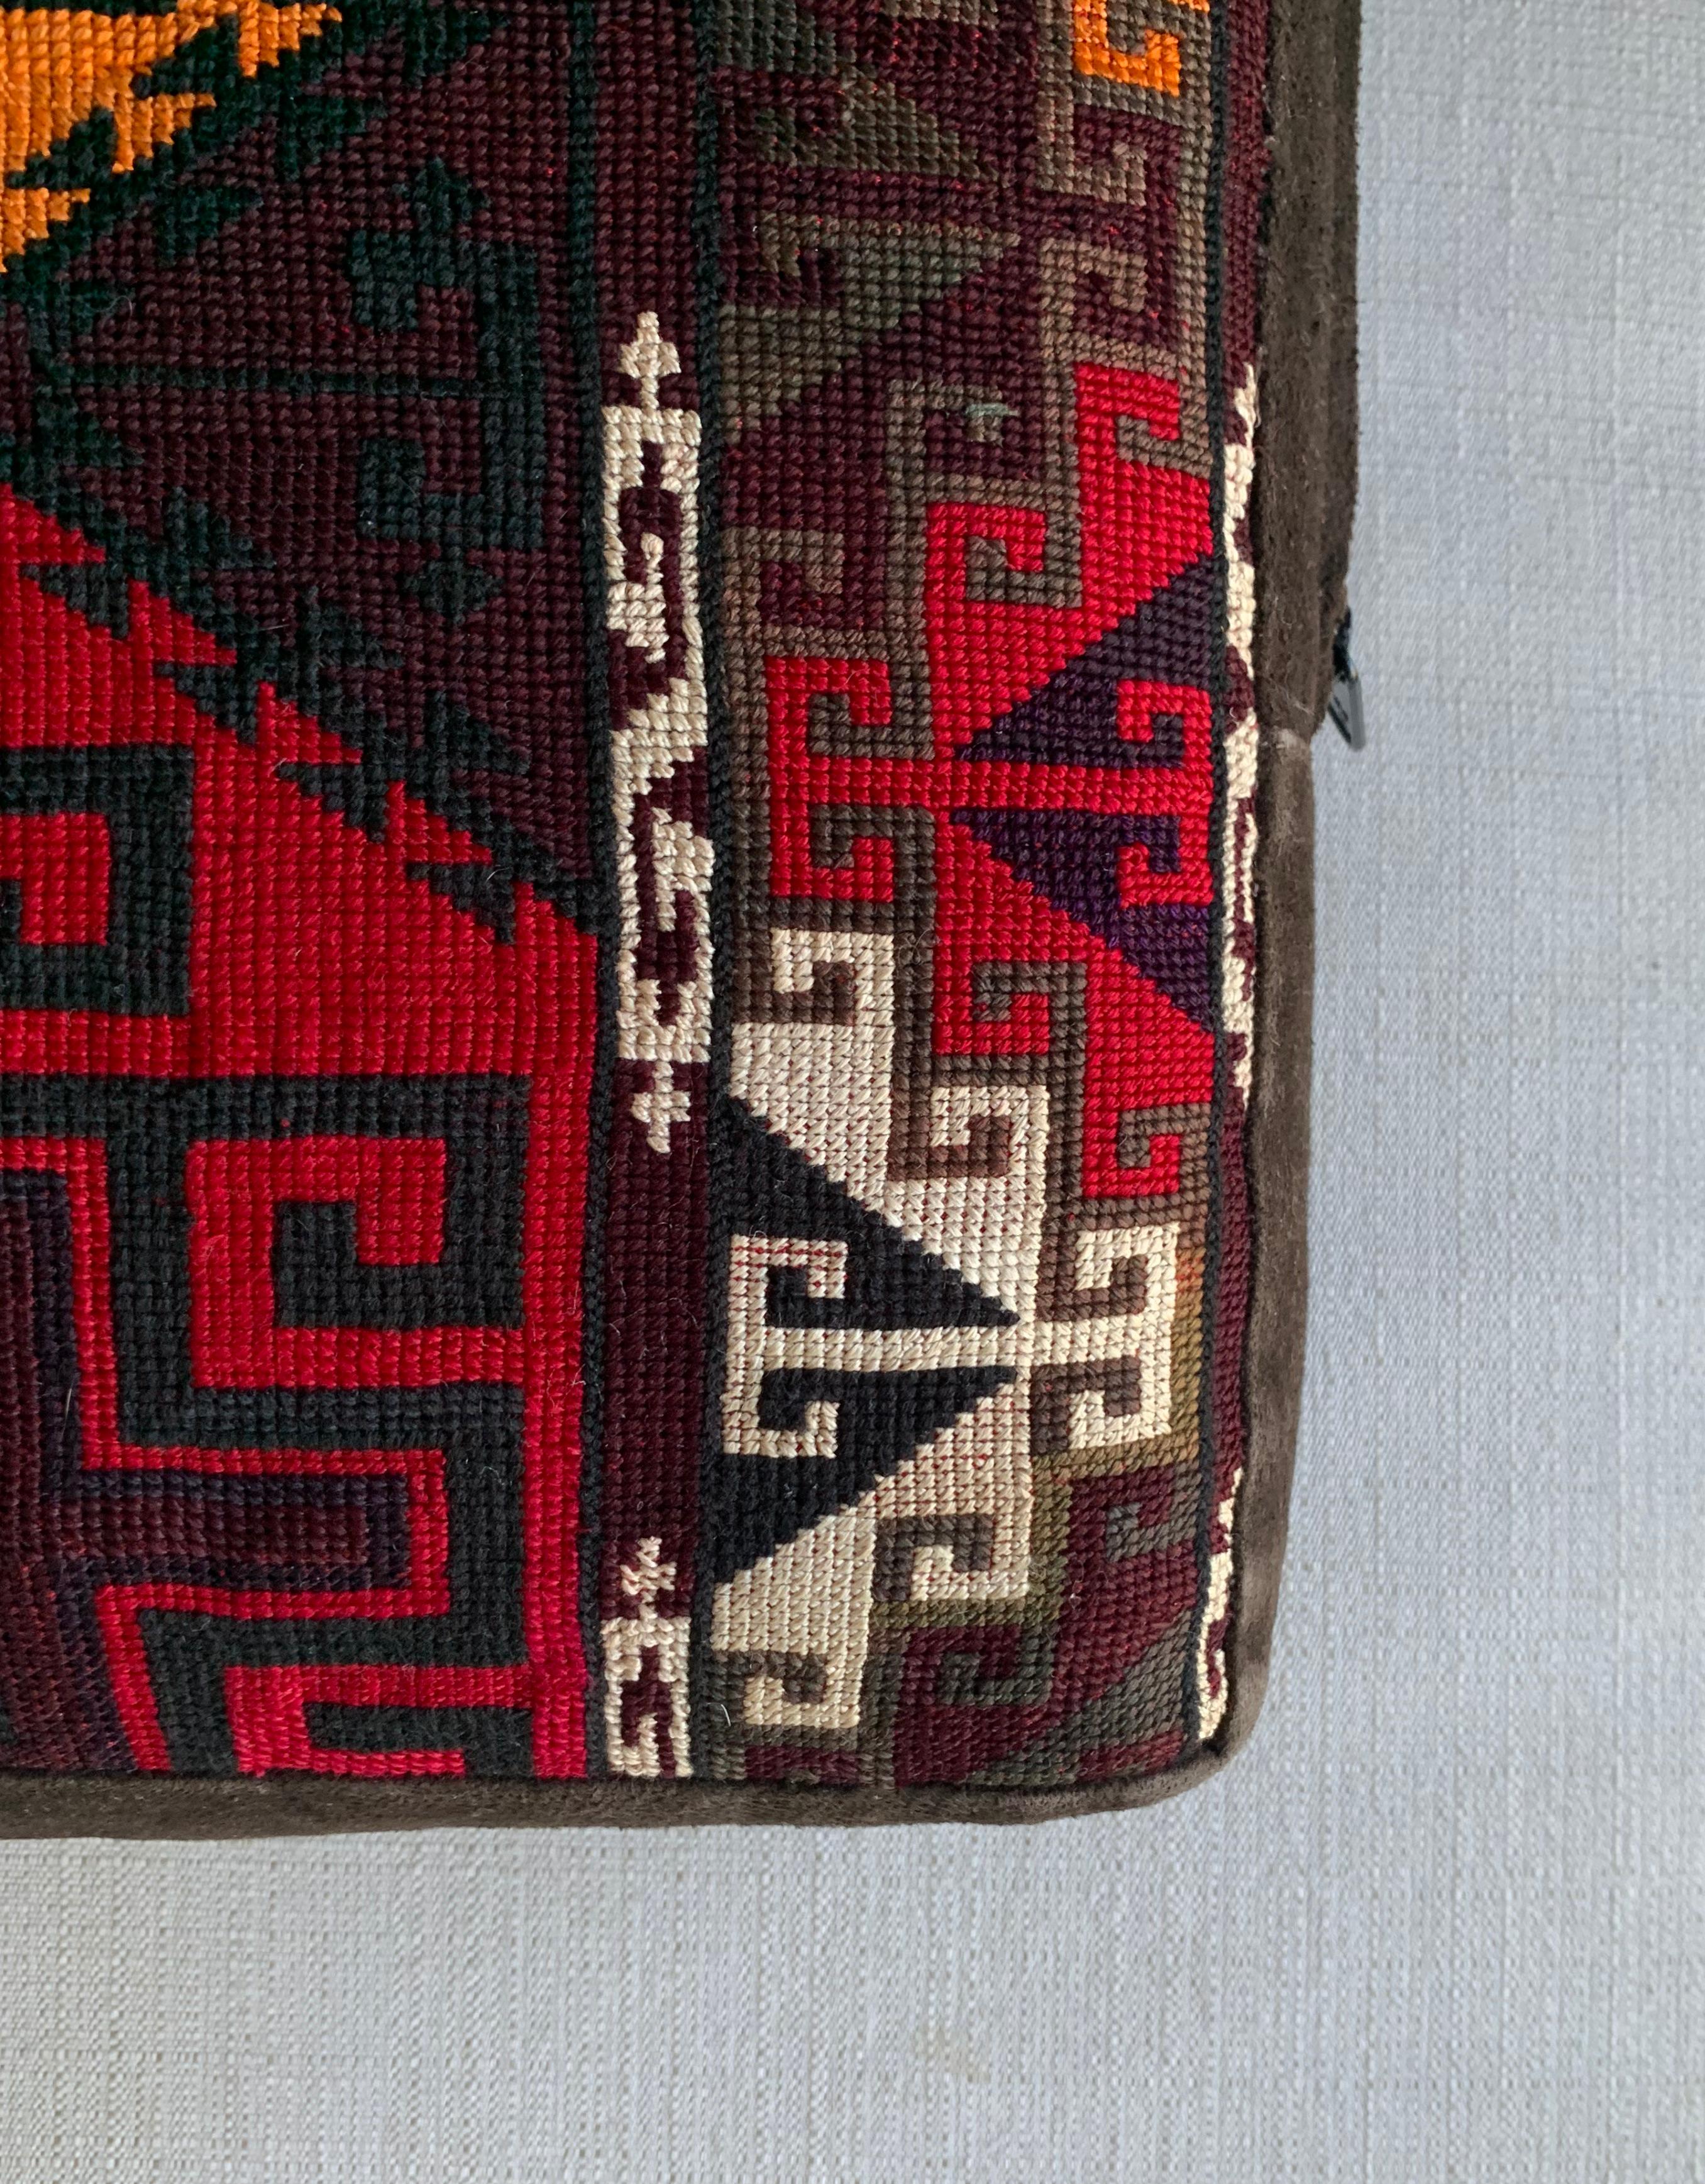 Suzani Central Asian Embroidered Textile Pillow, Mid 20th Century 3